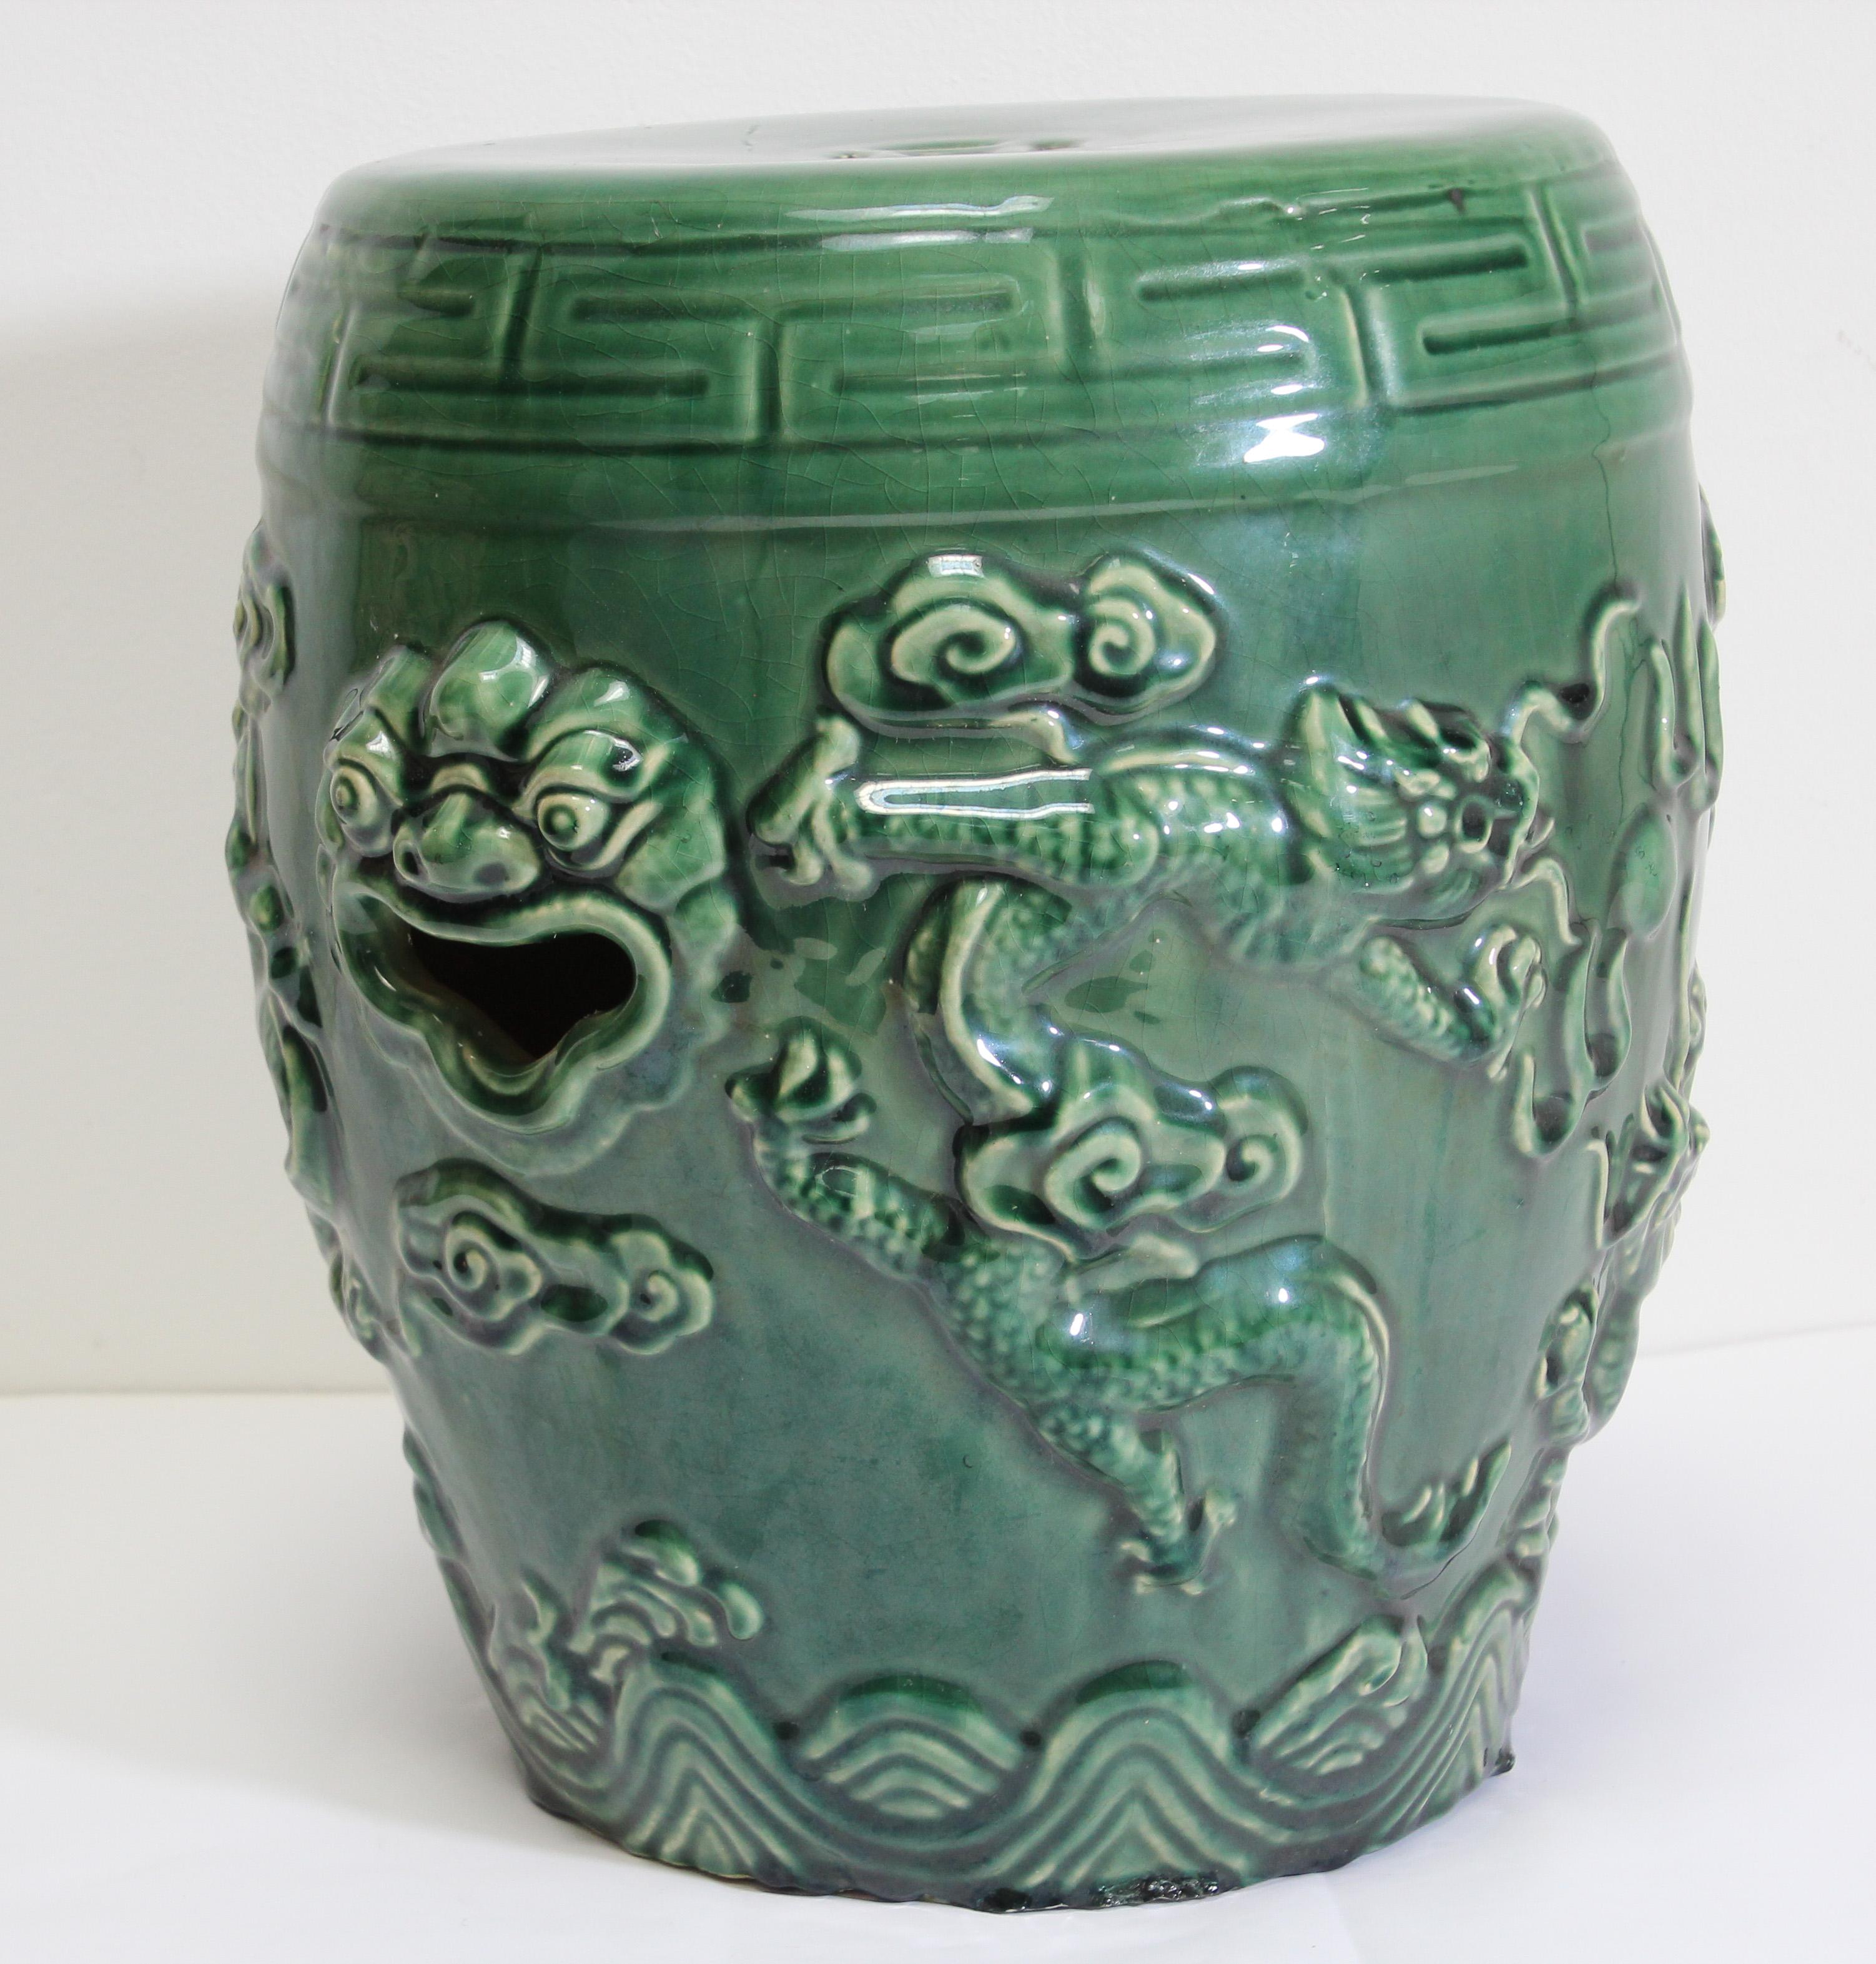 Emerald Green Chinese Ceramic Garden Stool with Dragons 5